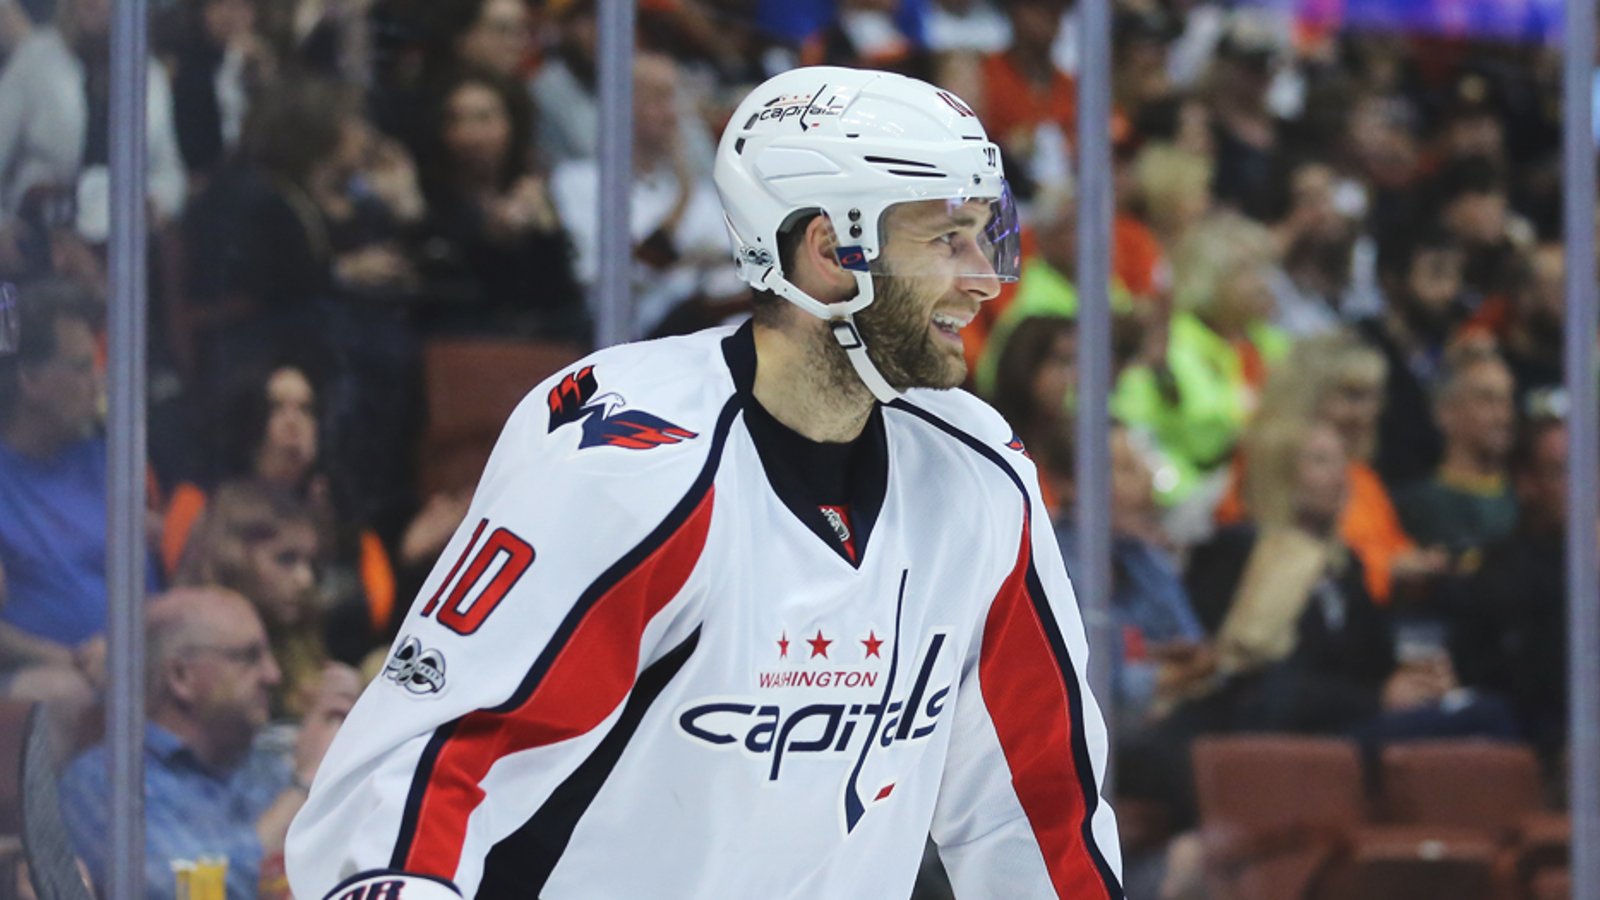 Breaking: Done deal between the Capitals and upcoming coveted UFA.